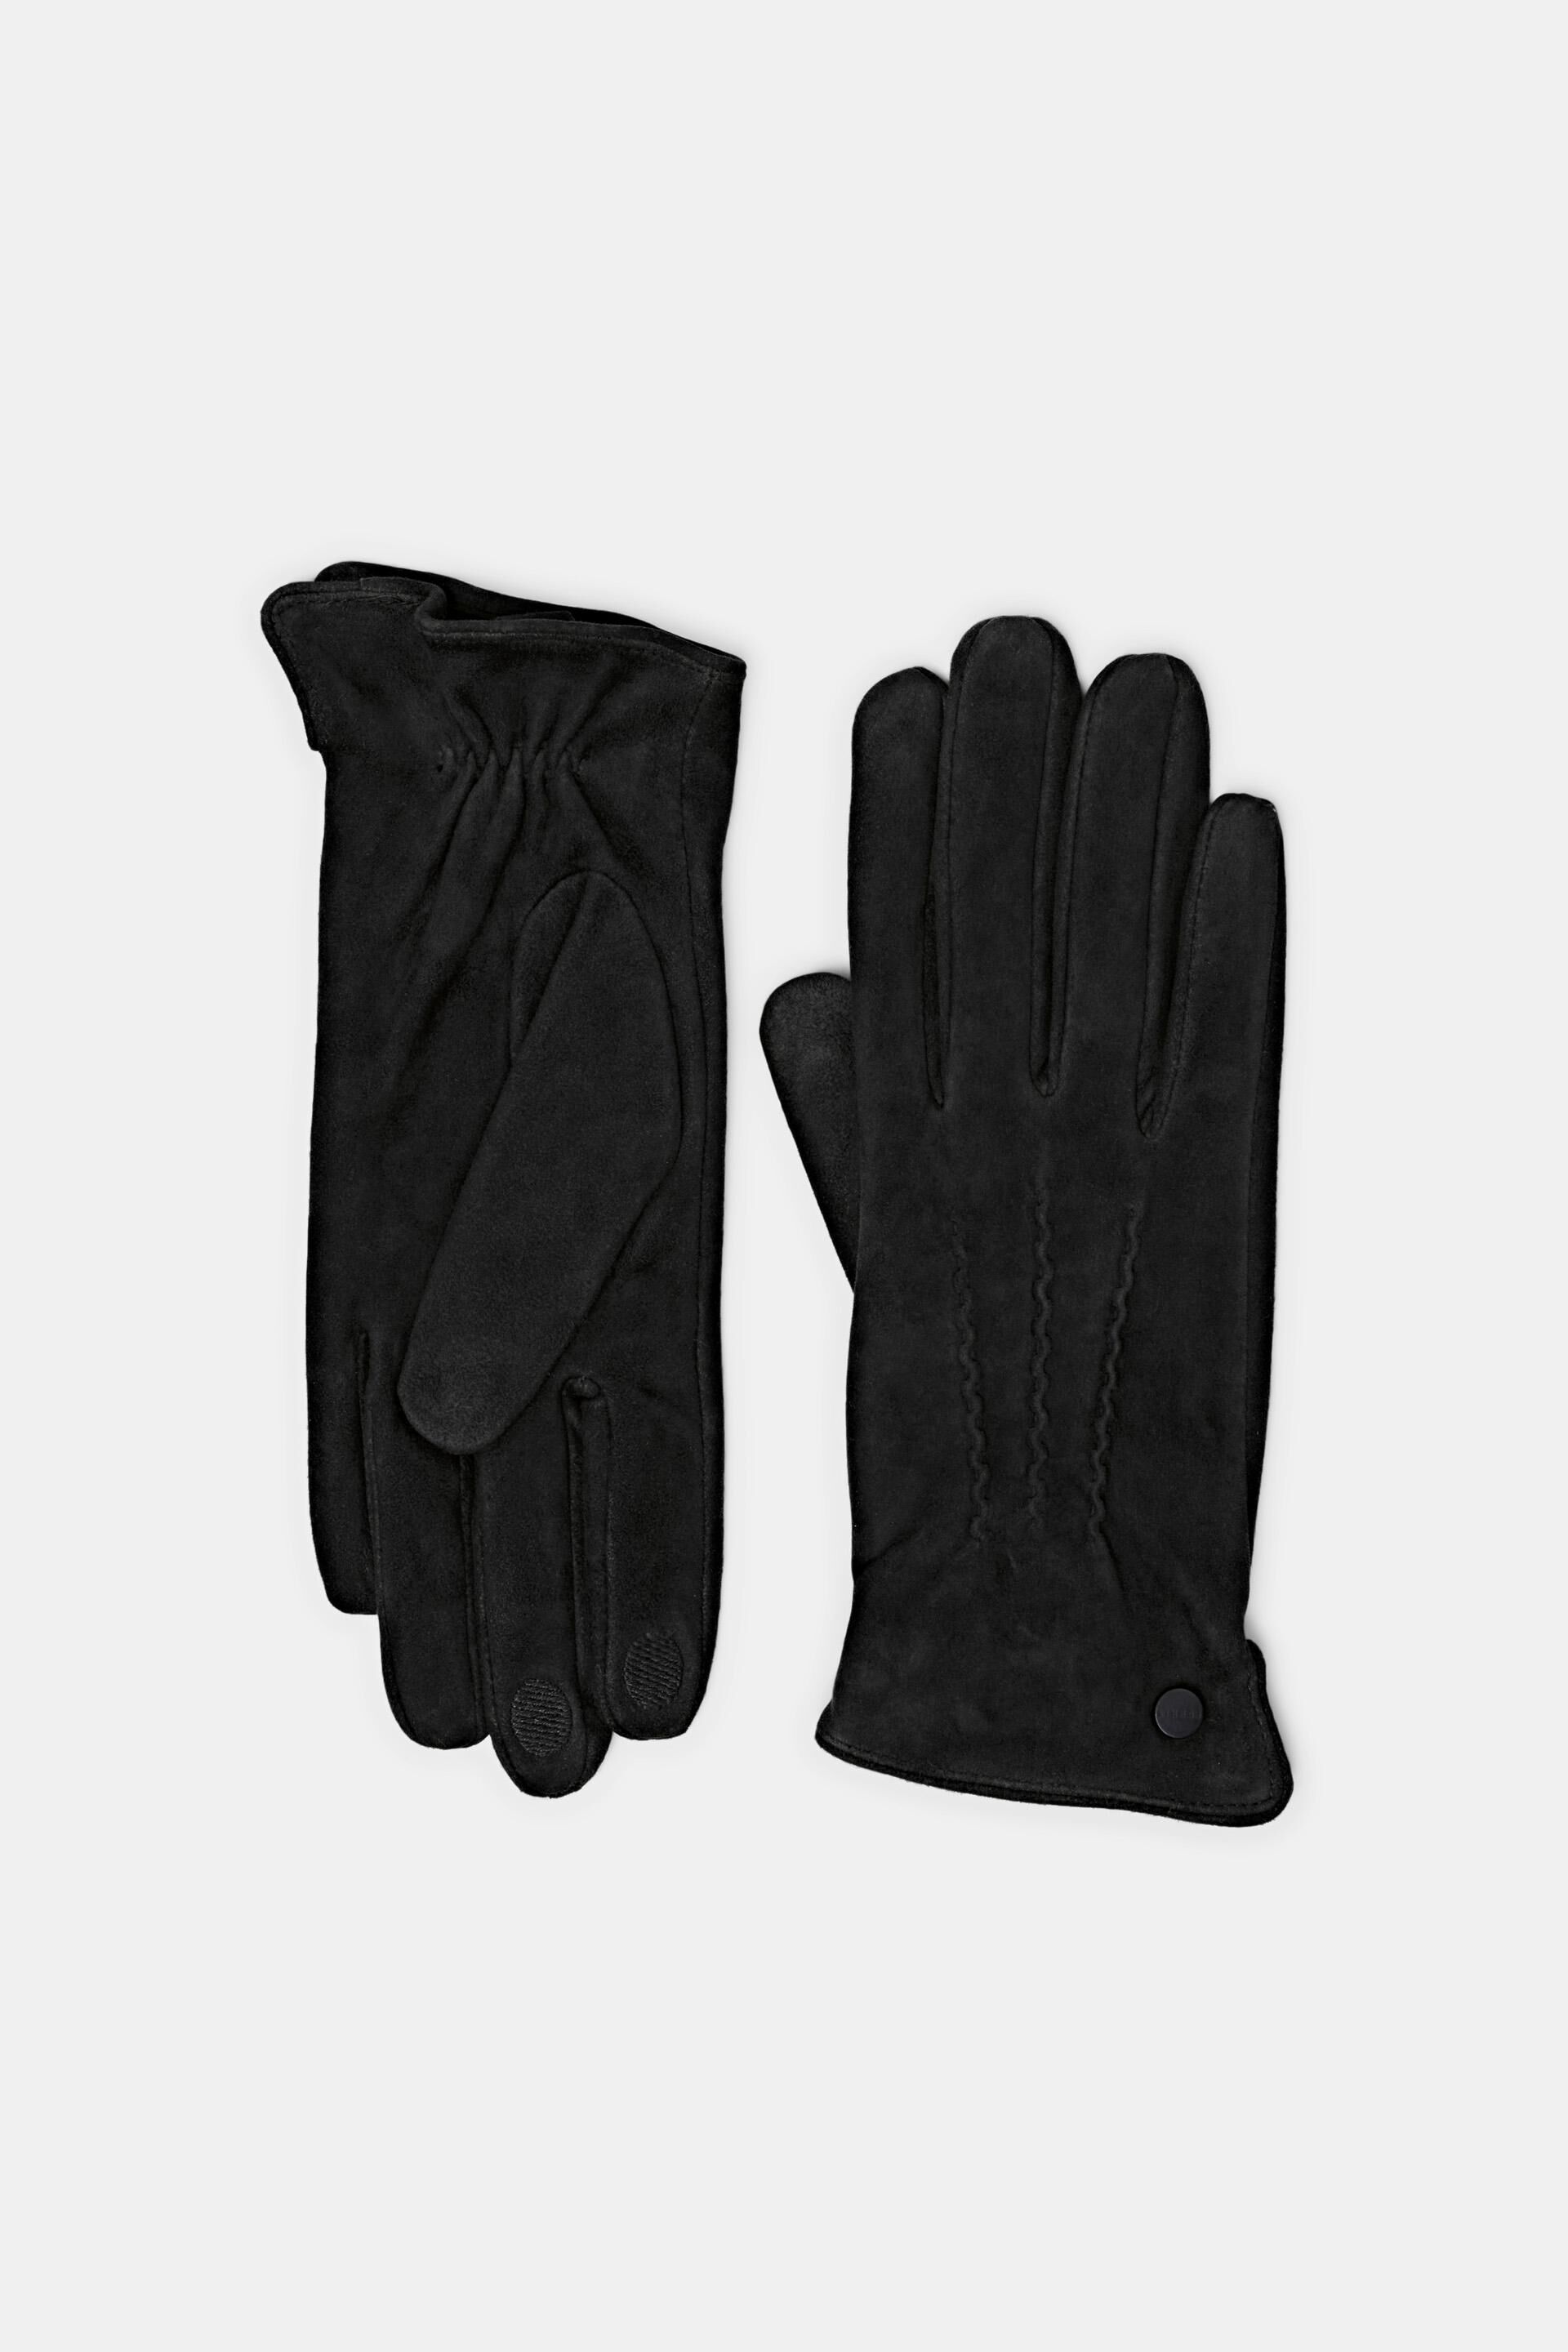 Accessories Gloves Fingered Gloves Esprit Gloves black-white graphic pattern casual look 